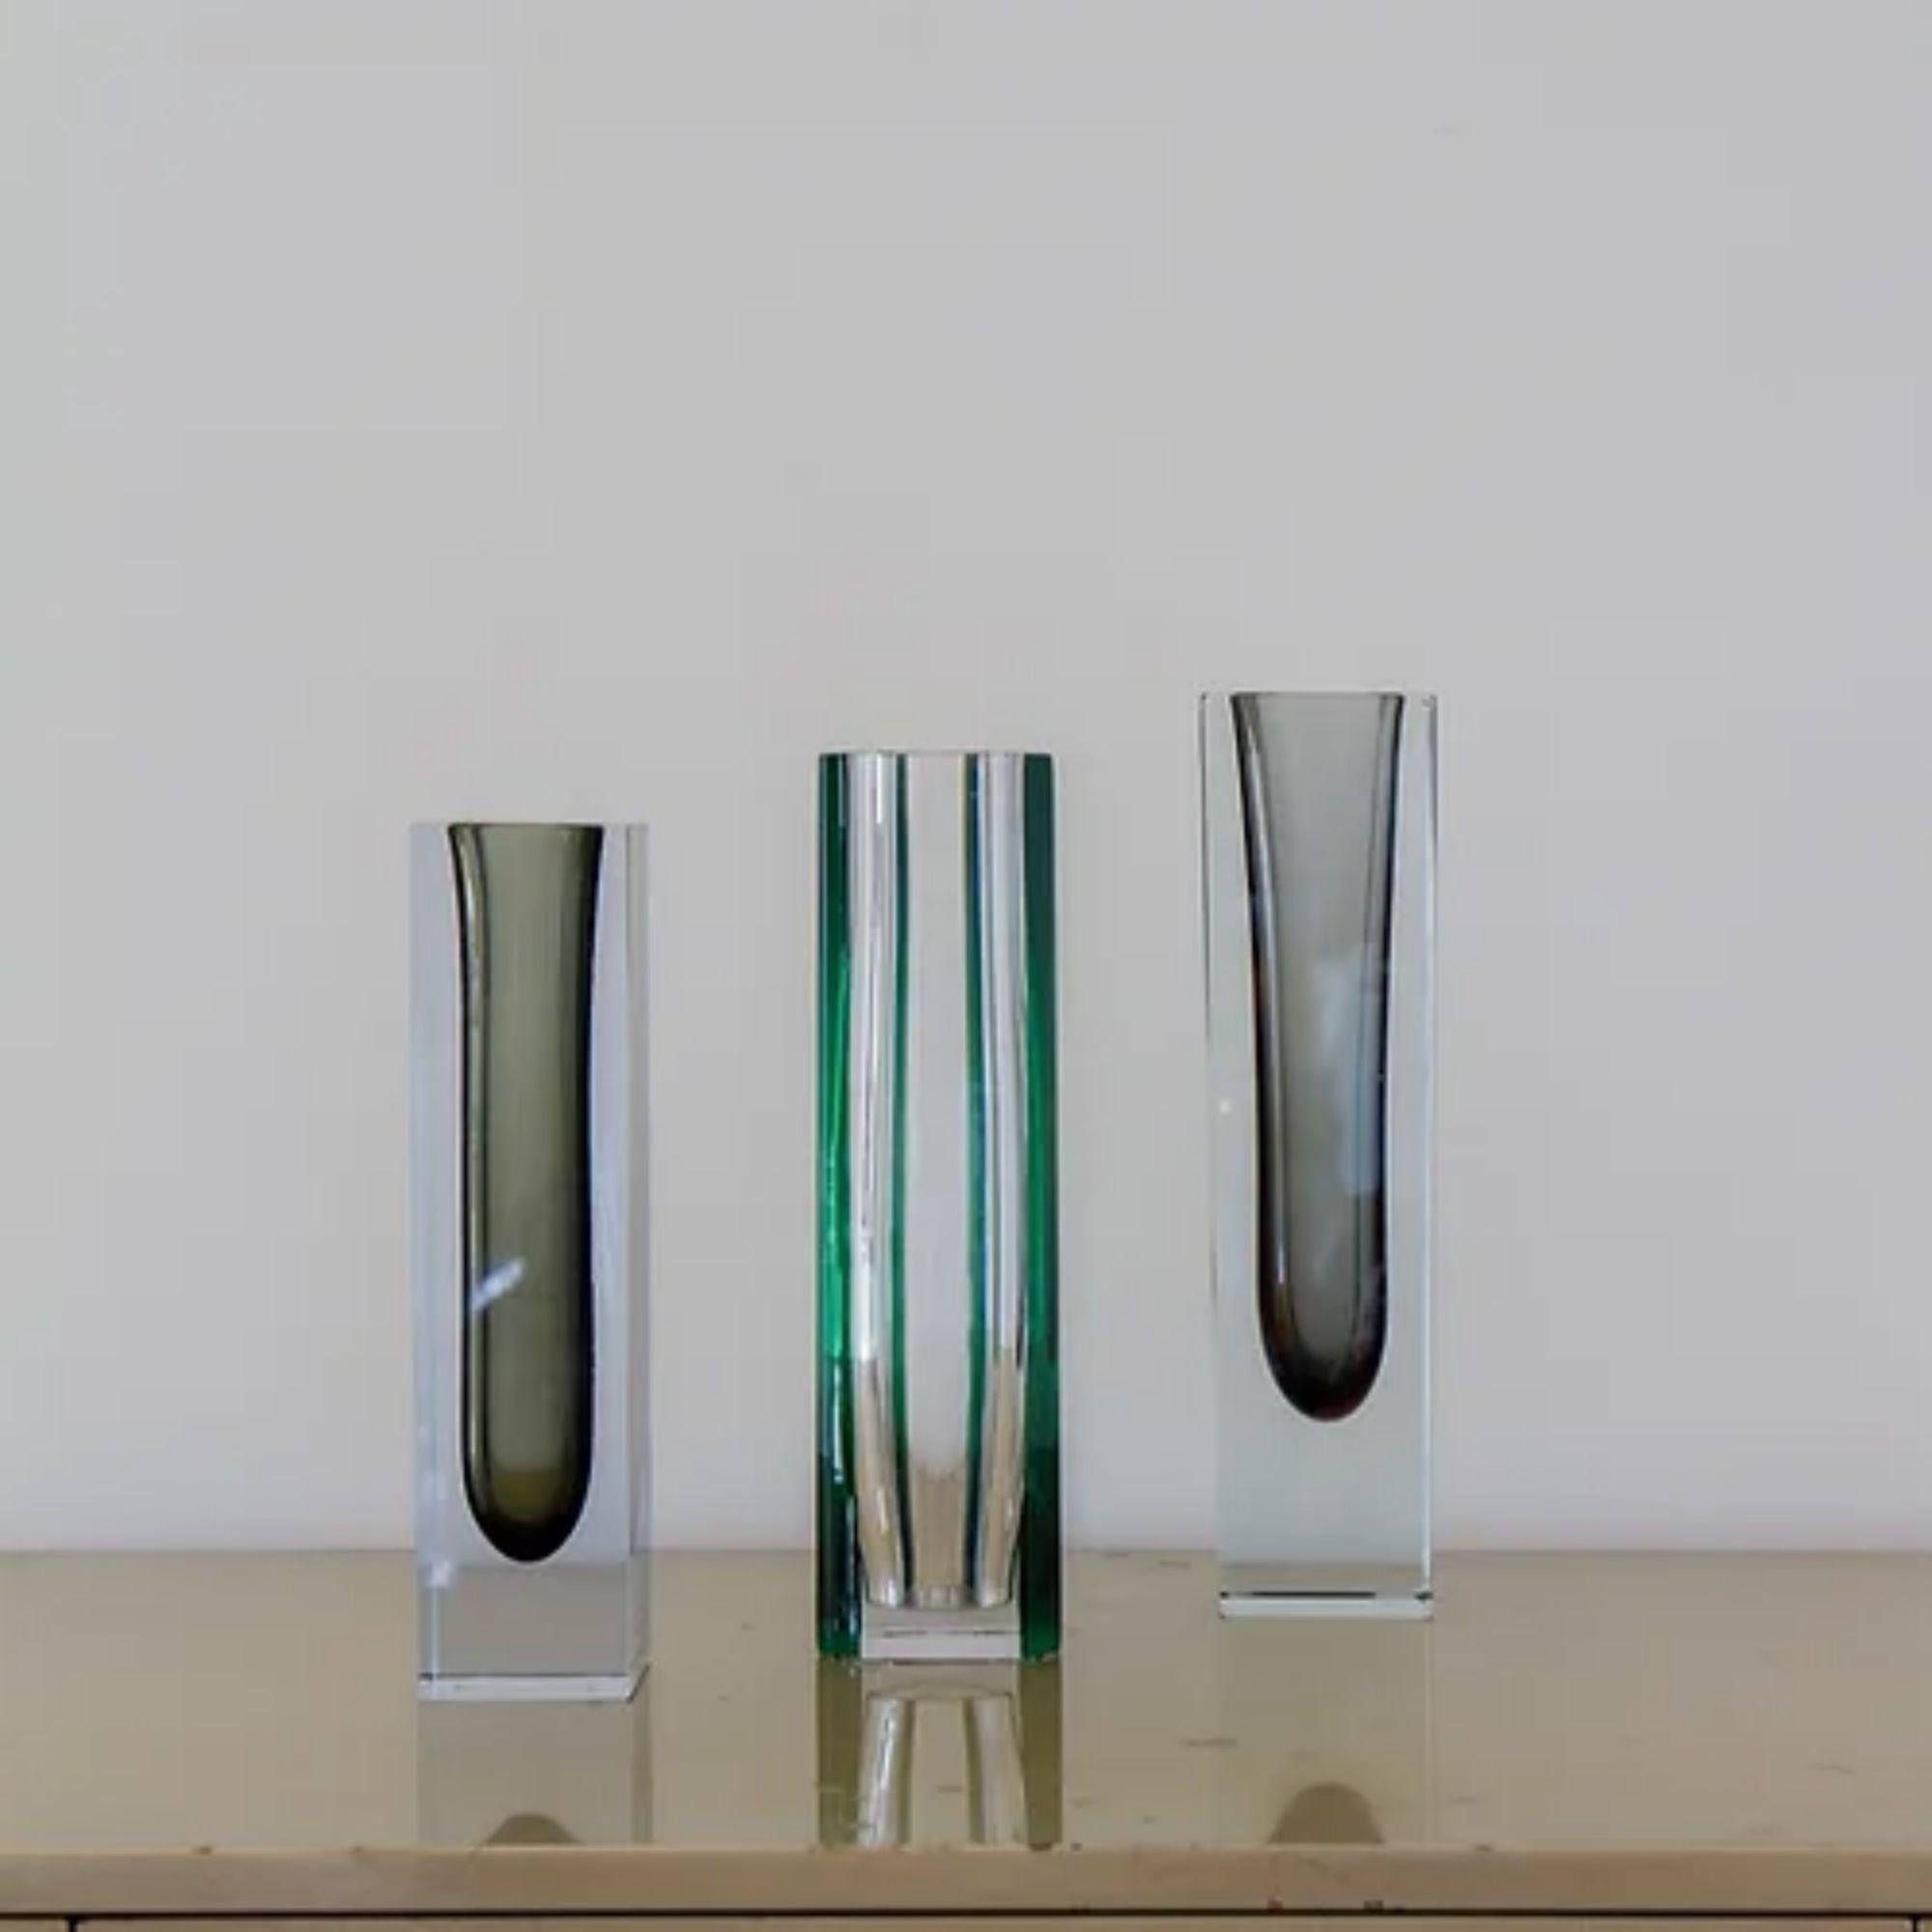 A group of three large Murano vases comprising of

A large square Murano Sommerso glass vase with a charcoal centre cased in clear glass, small chip to top rim.
Measures: 25.5cms high x 6.5cms square

A unusual clear murano glass vase with